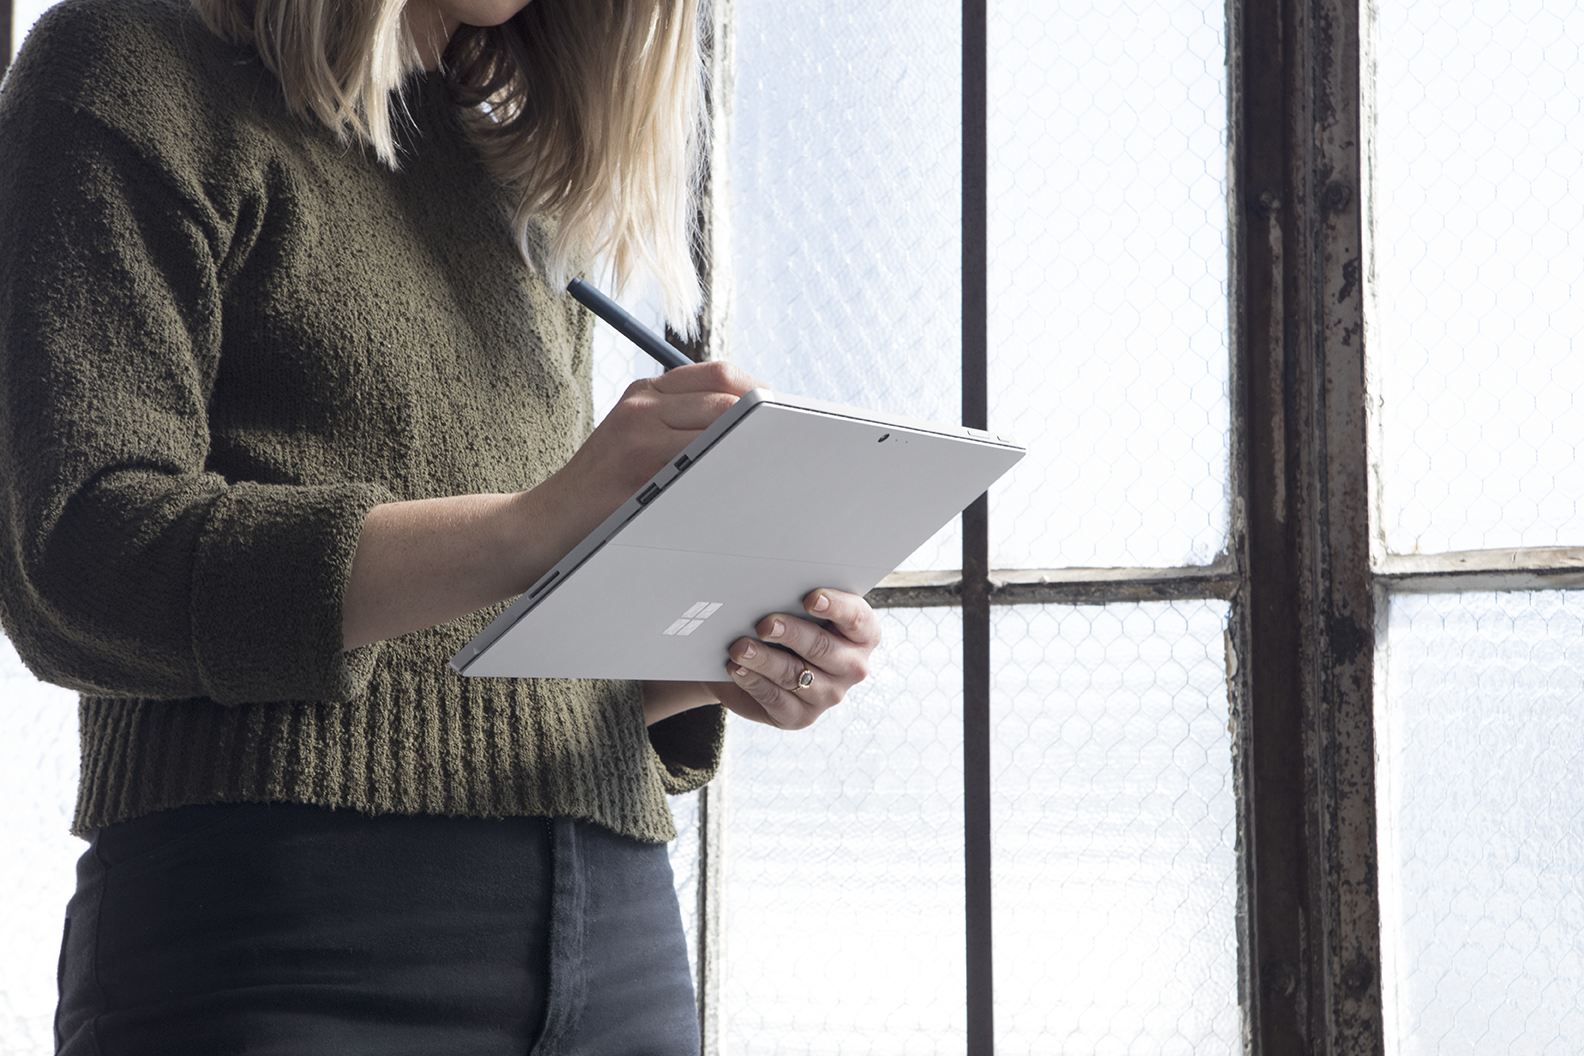 Woman standing up by window using Microsoft Surface device and Pen